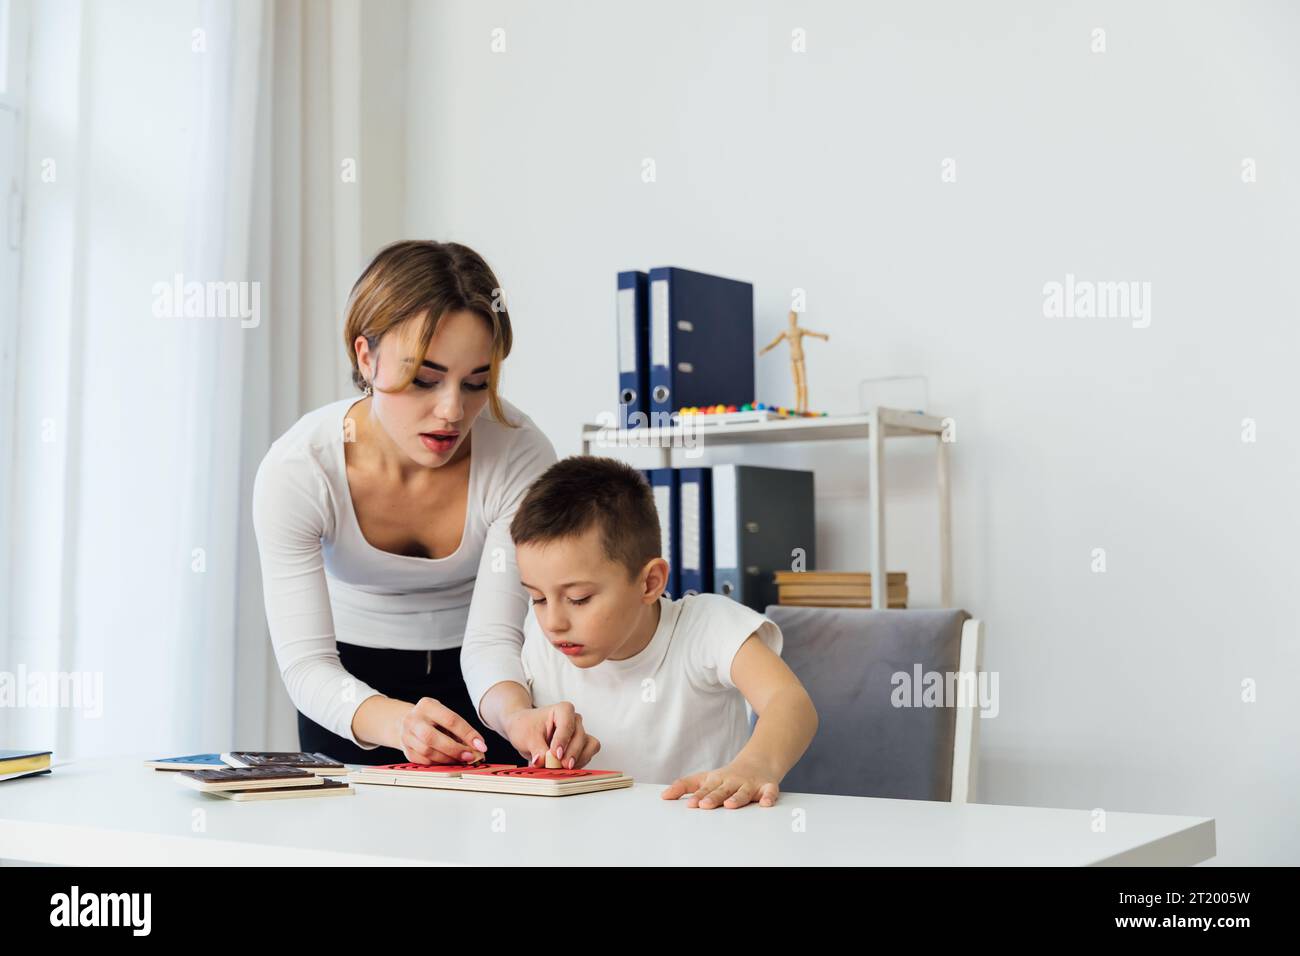 the work of a child psychologist with a child in the office of educational games Stock Photo